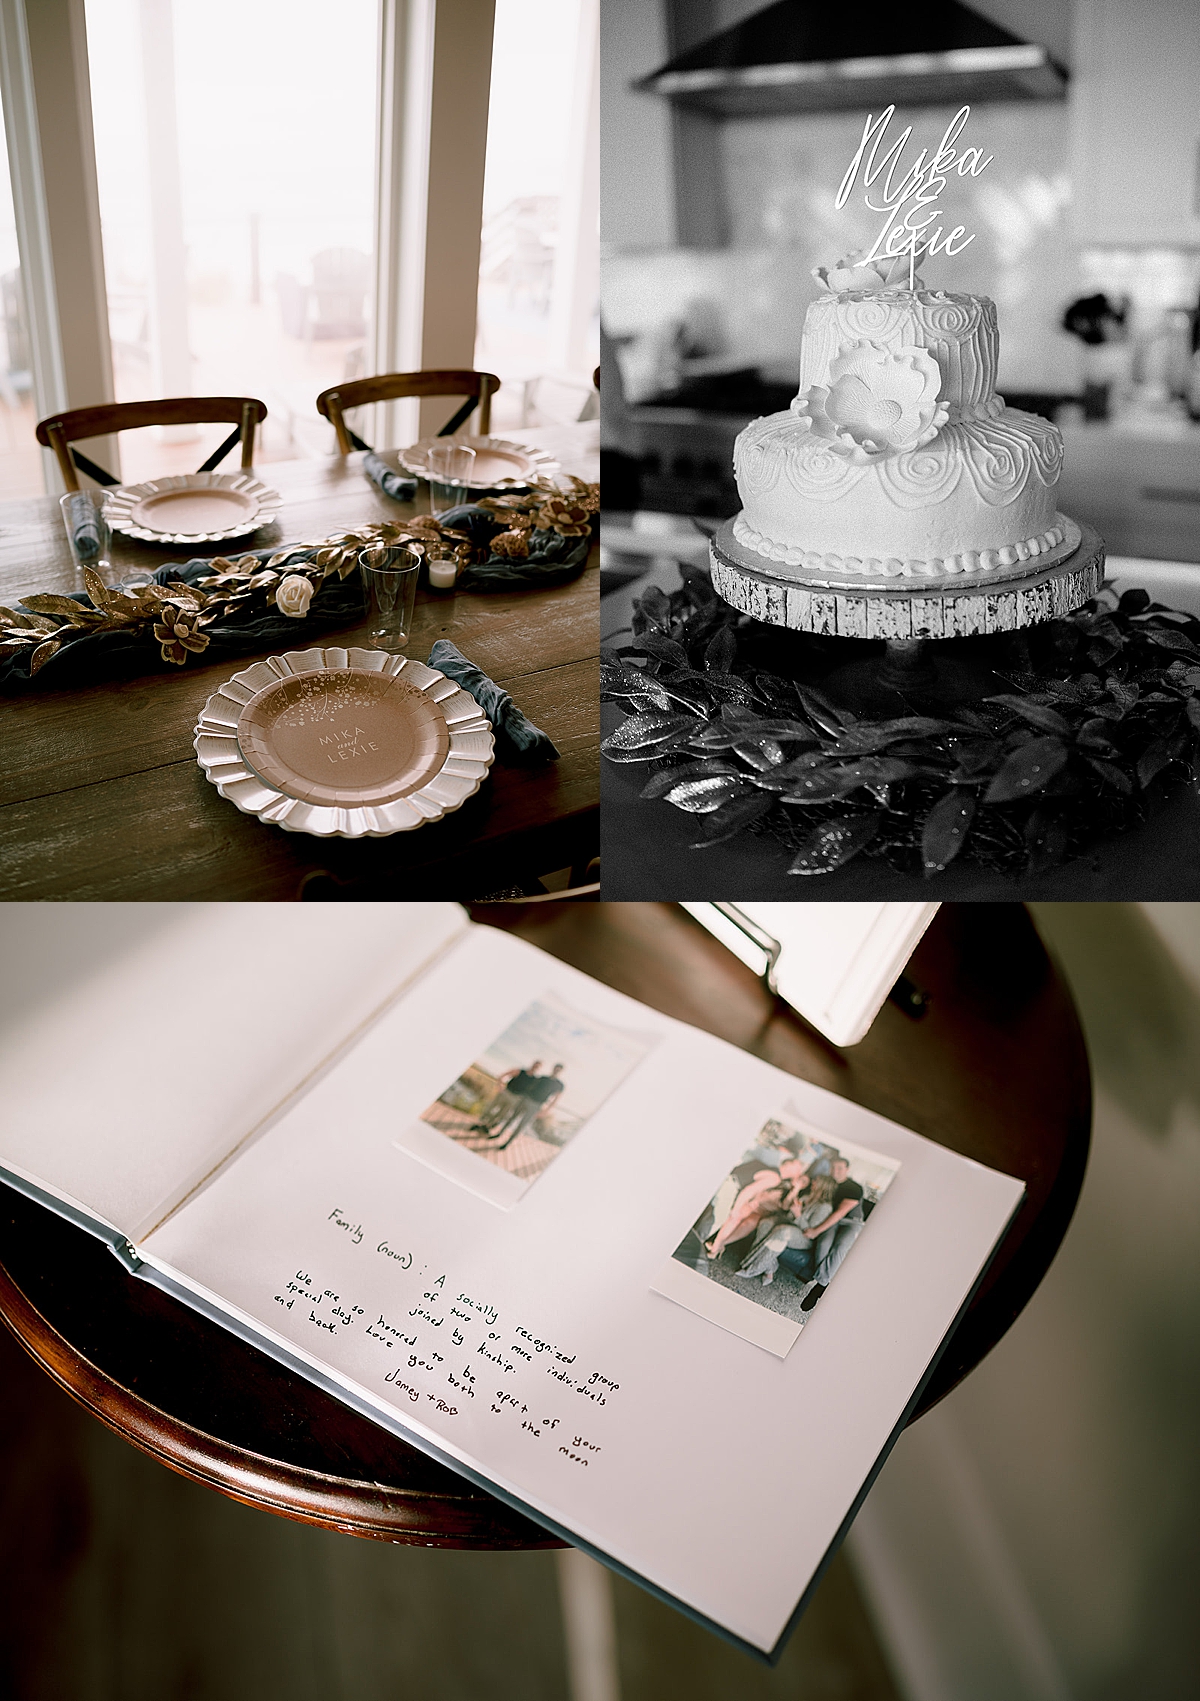 wedding cake and guest book at reception by Emily burns photo